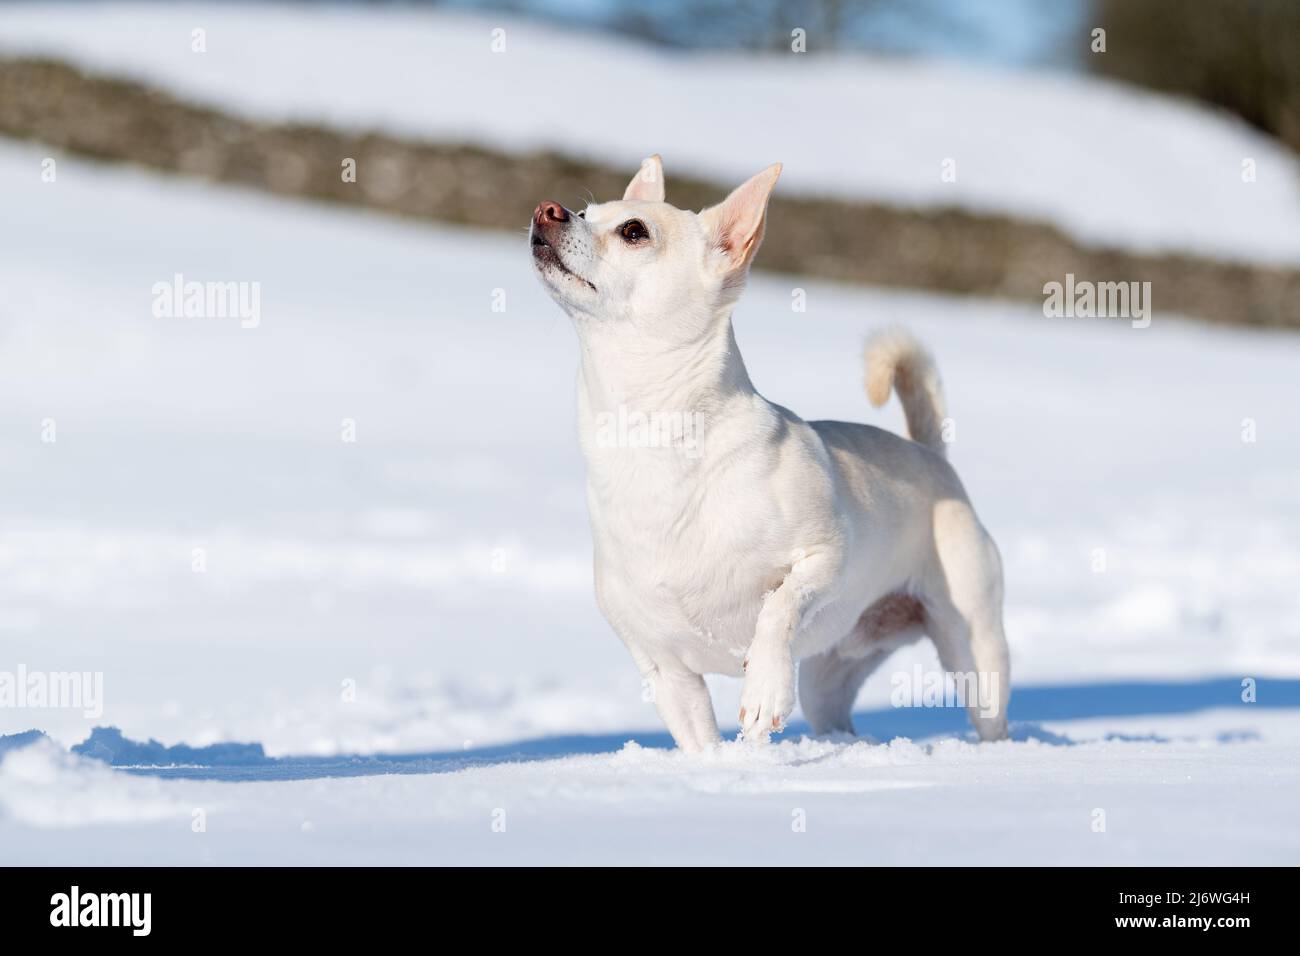 Chihuahua dog playing in snow, North Yorkshire, UK. Stock Photo